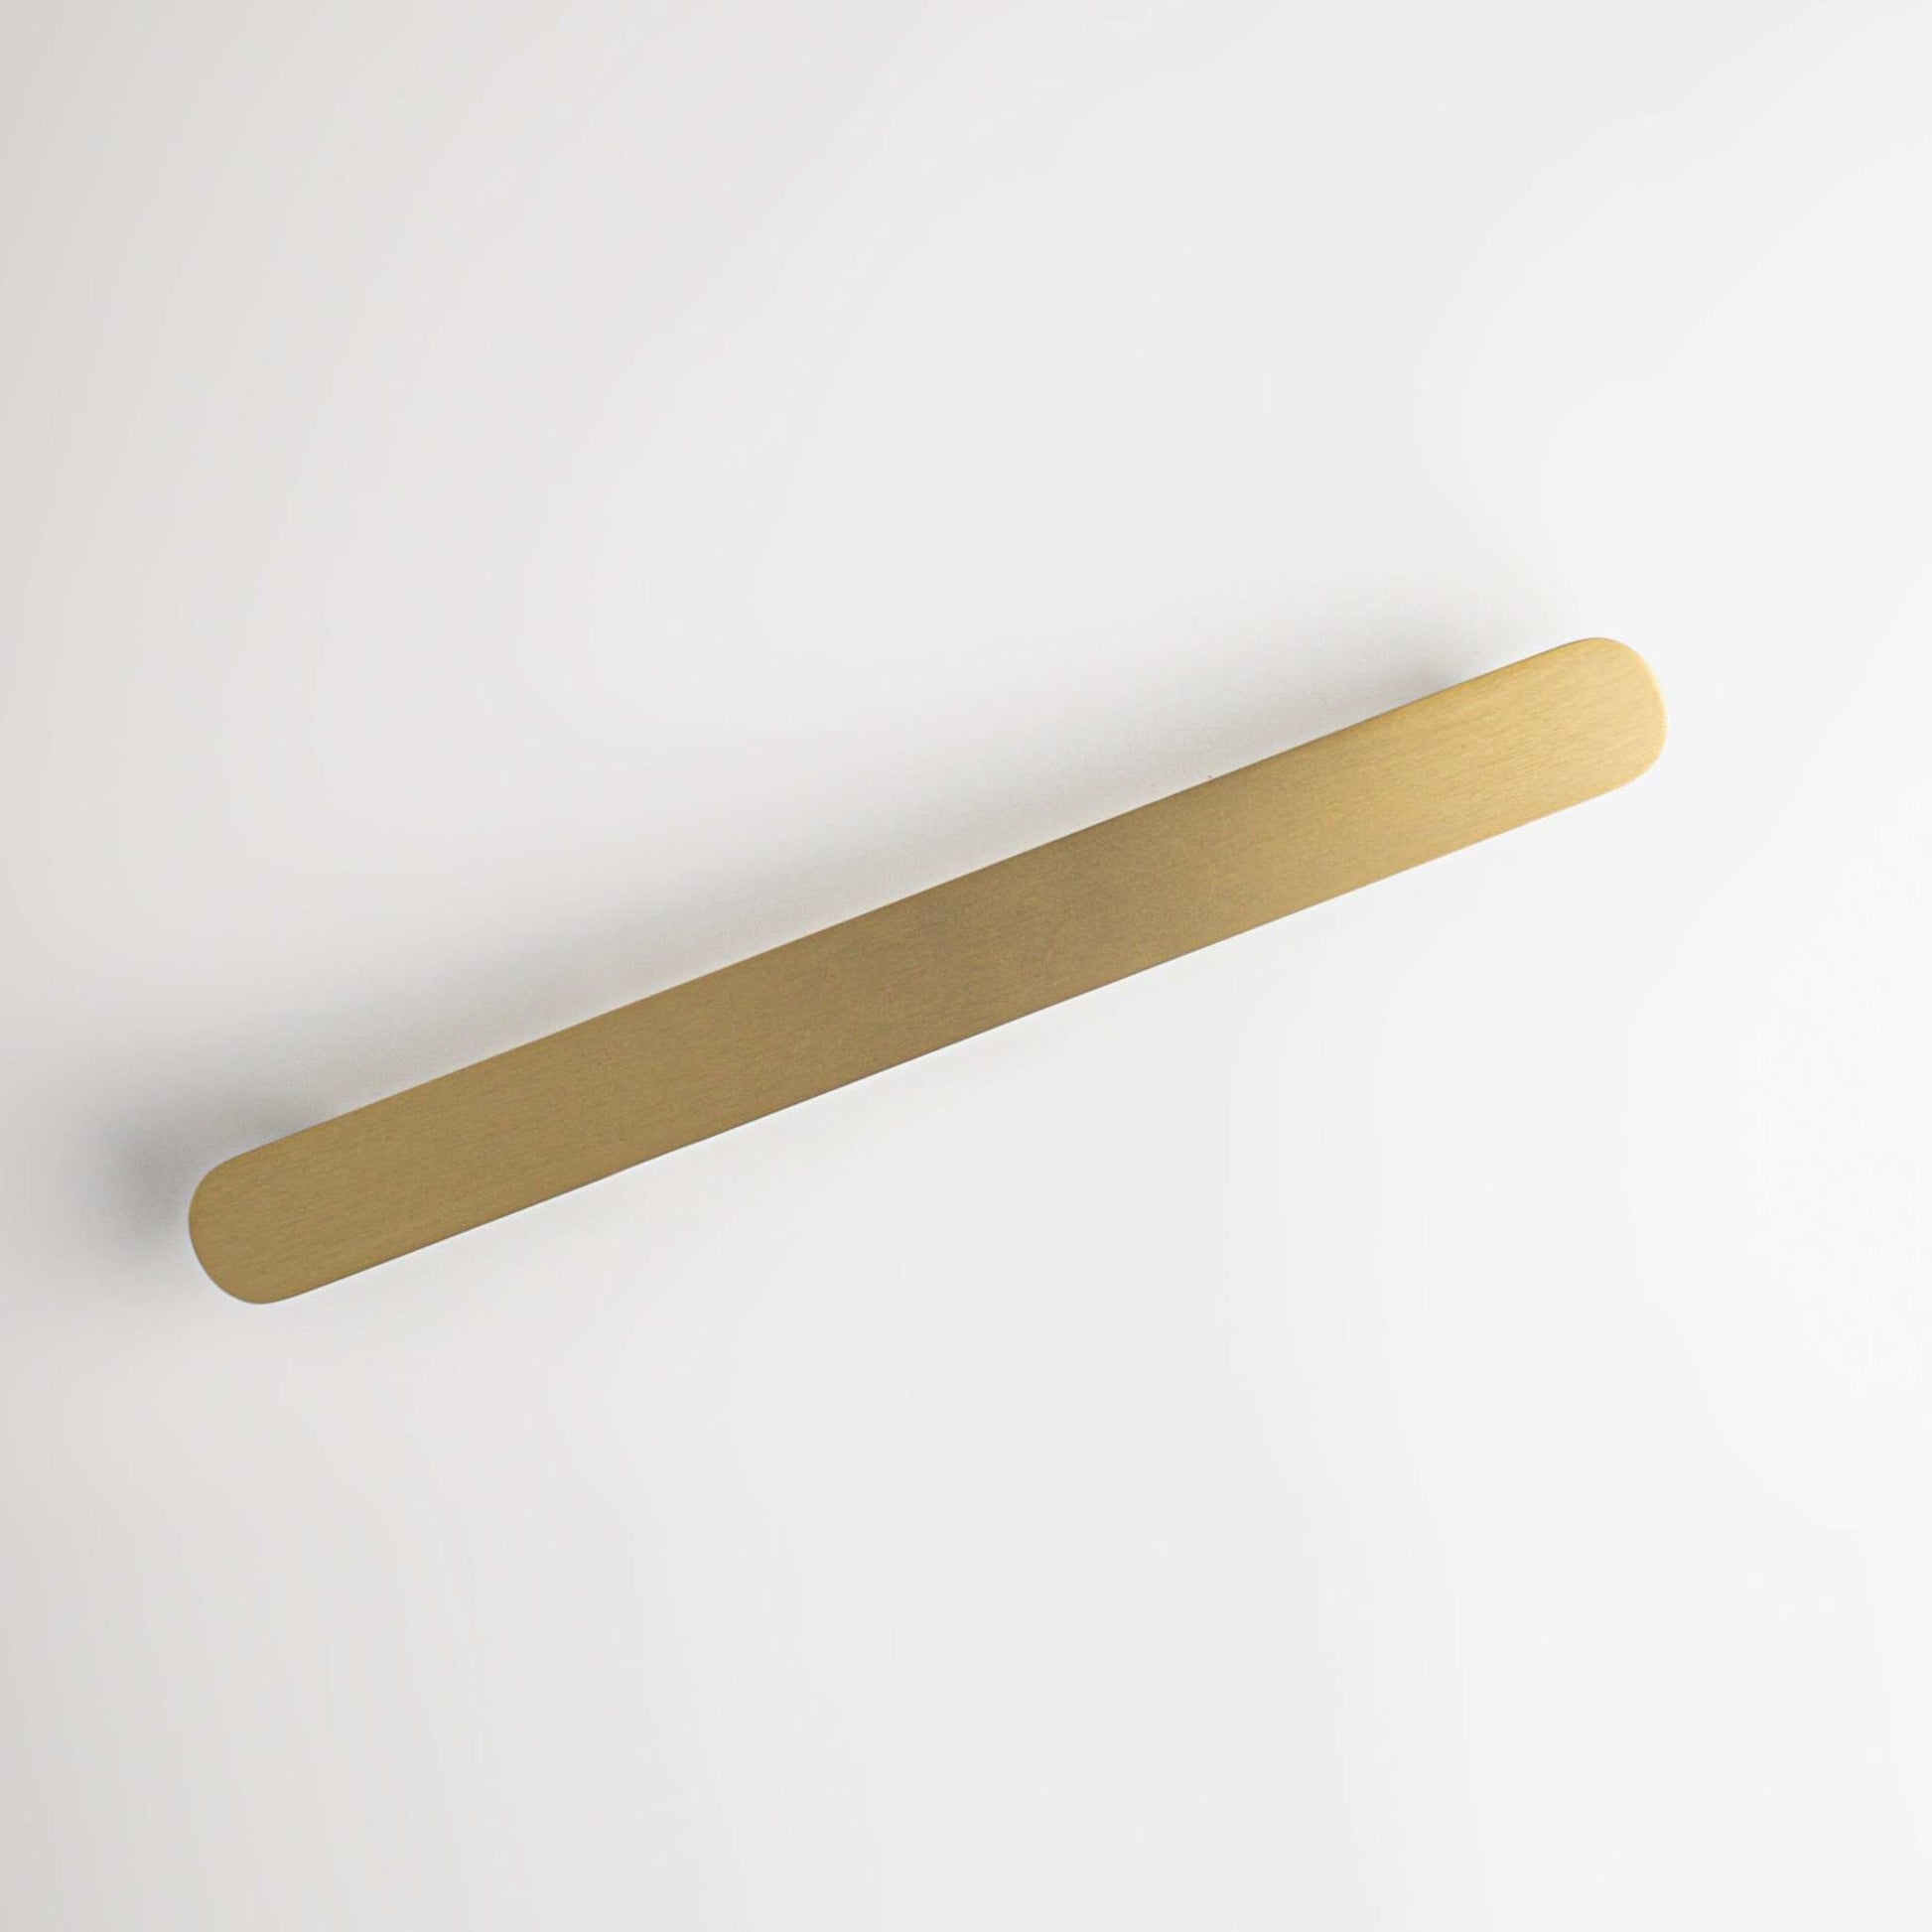 Orbital, Solid Brass Cabinet Pulls


Our Orbital Pull adds a touch of simplicity to any contemporary design project. The solid brass construction has an incredible weight in the hand, ensuring it wilpullOrbital, Solid Brass Cabinet Pulls